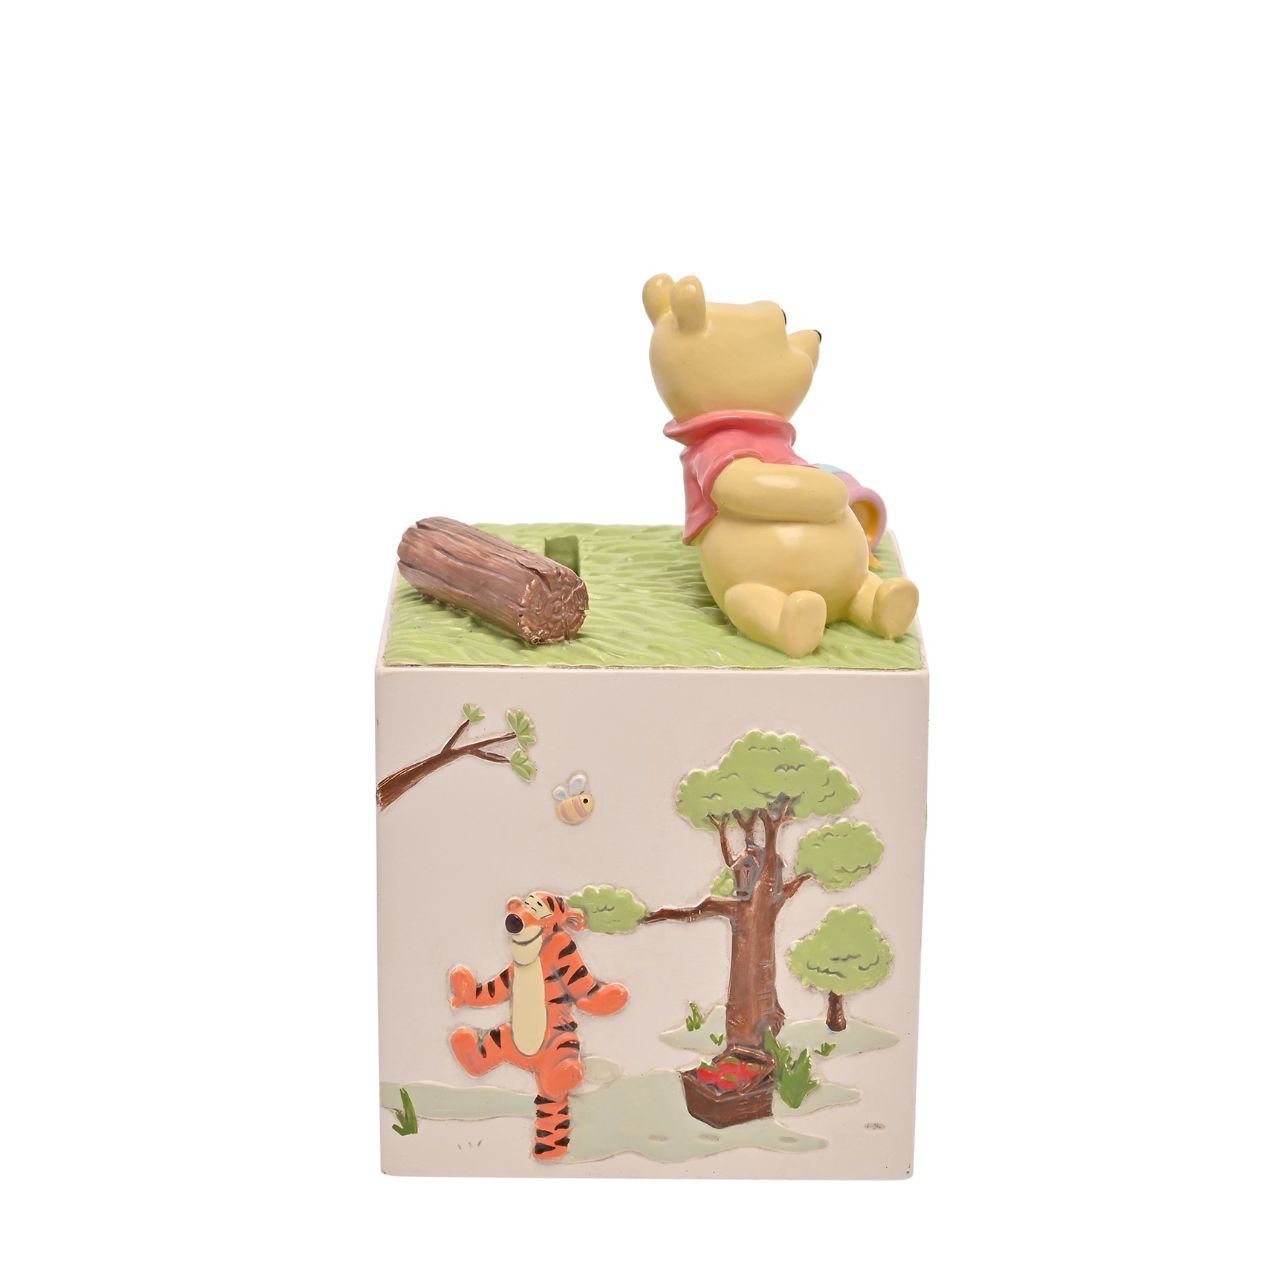 This white money box features the instantly recognisable Winnie the Pooh characters and brightens up saving for a rainy day. Based on the works of A.A.Milne and E.H.Shepard, the characters personalities are readily on display to see.